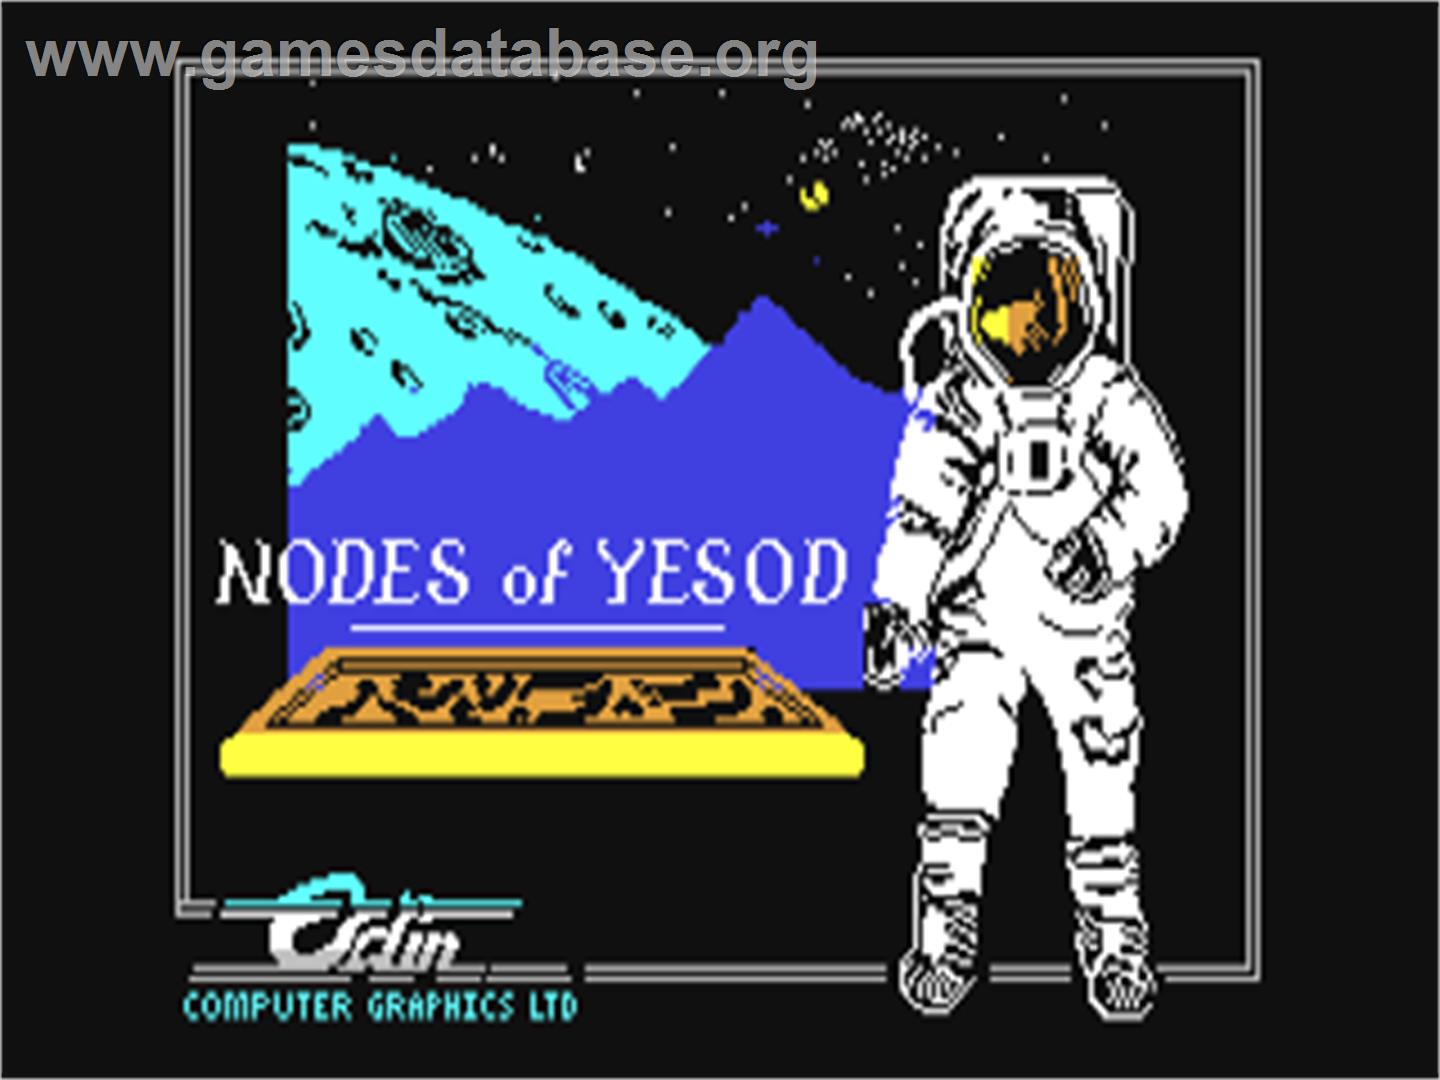 Nodes of Yesod - Commodore 64 - Artwork - Title Screen